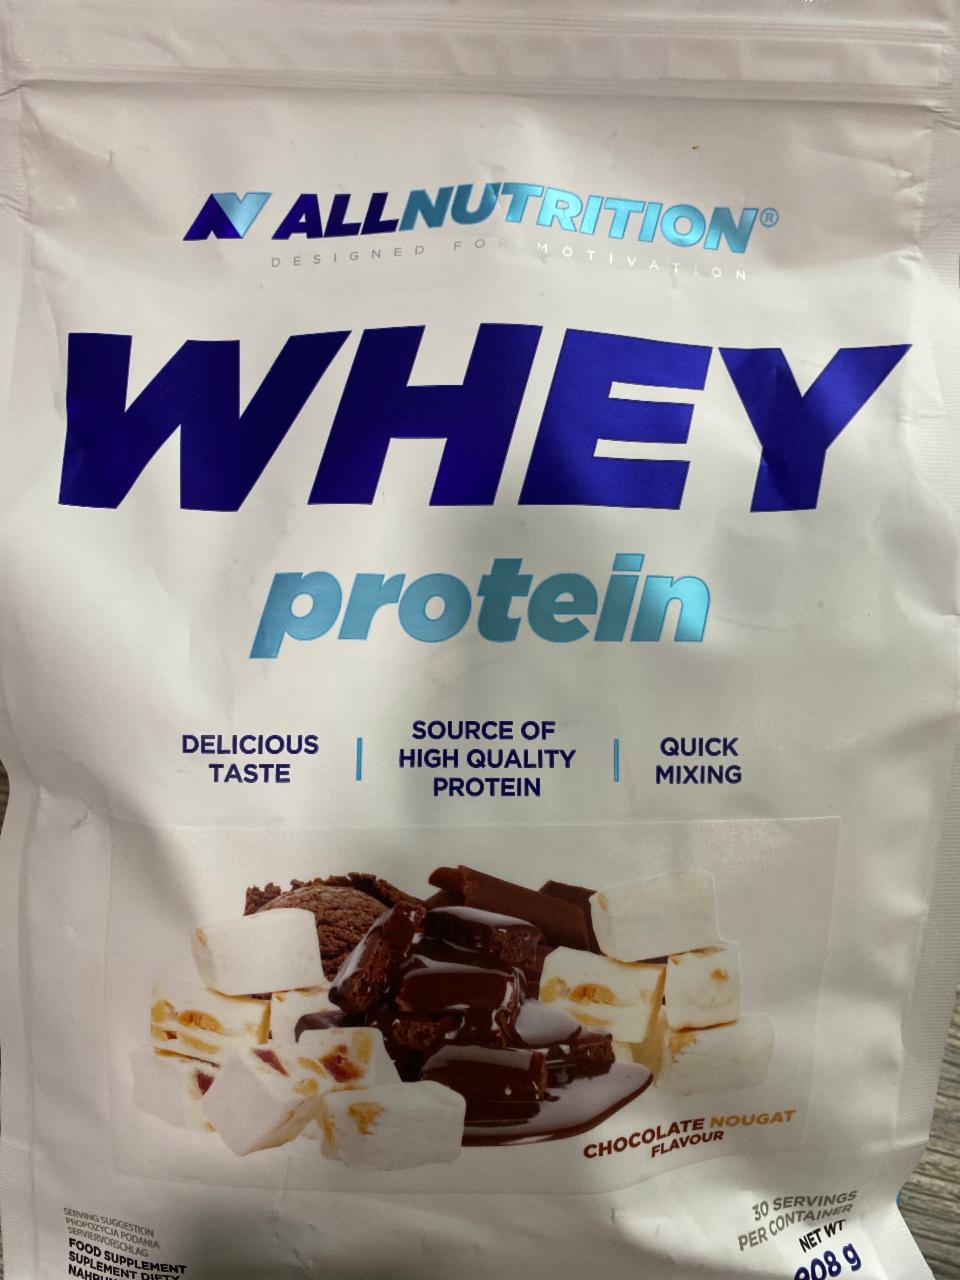 Képek - all nutrition whey protein chocolate nougat